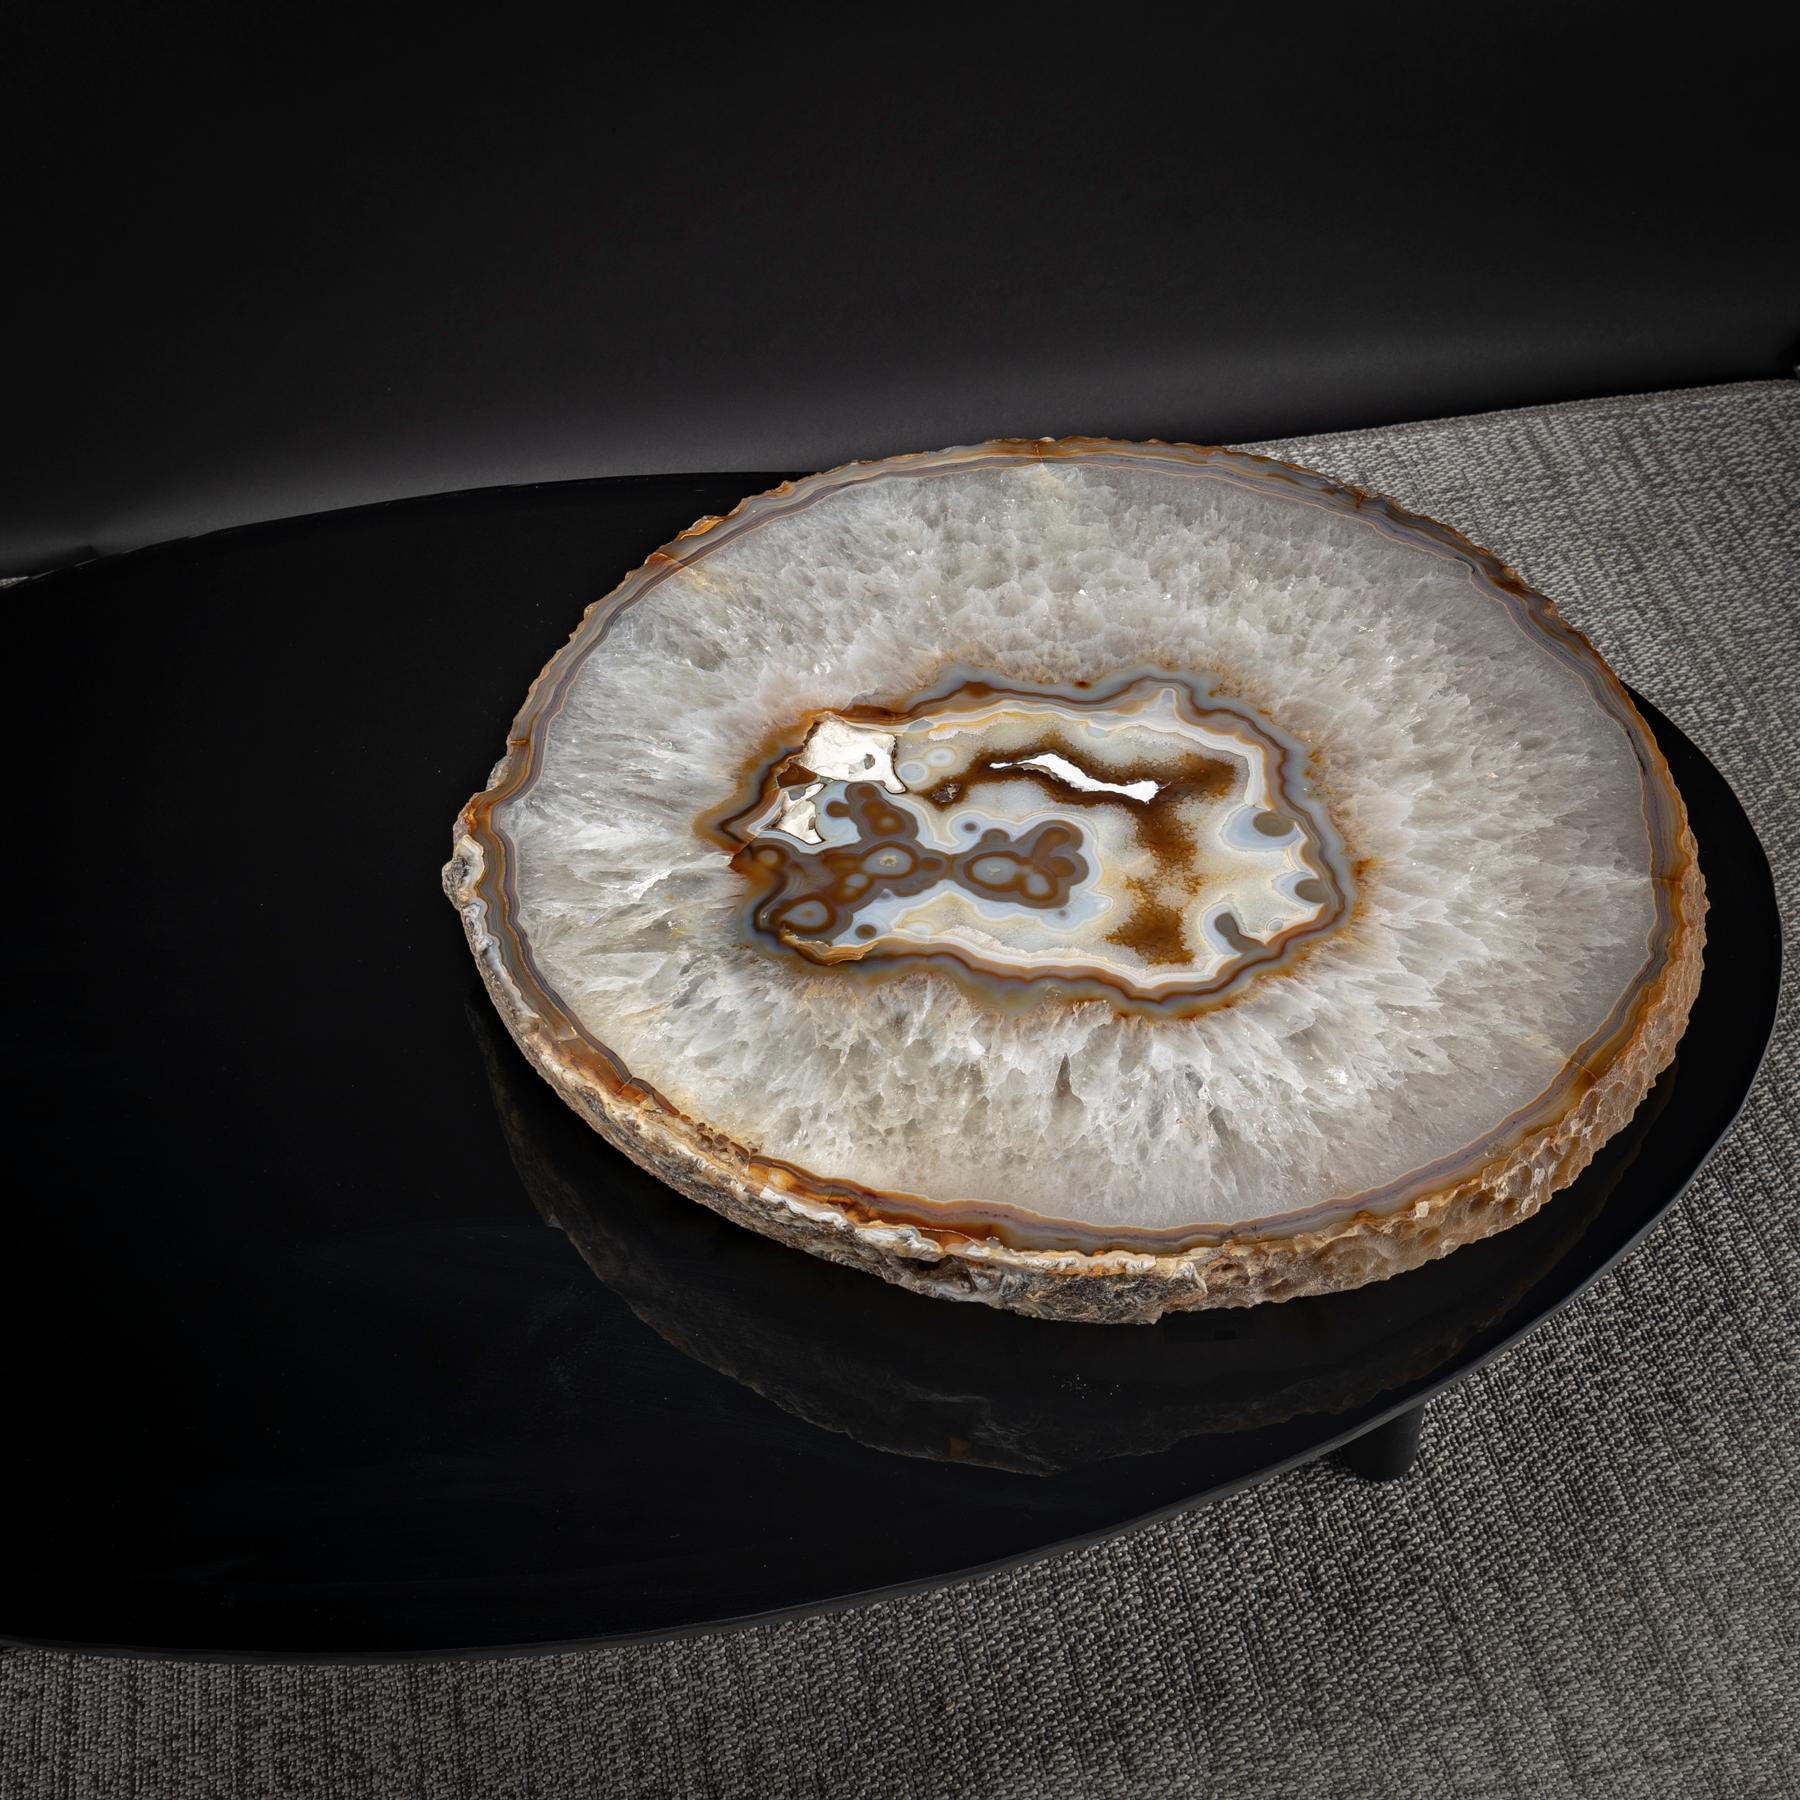 Mexican Center Table, with Lazy Susan Rotating Brazilian Agate on Black Tempered Glass For Sale